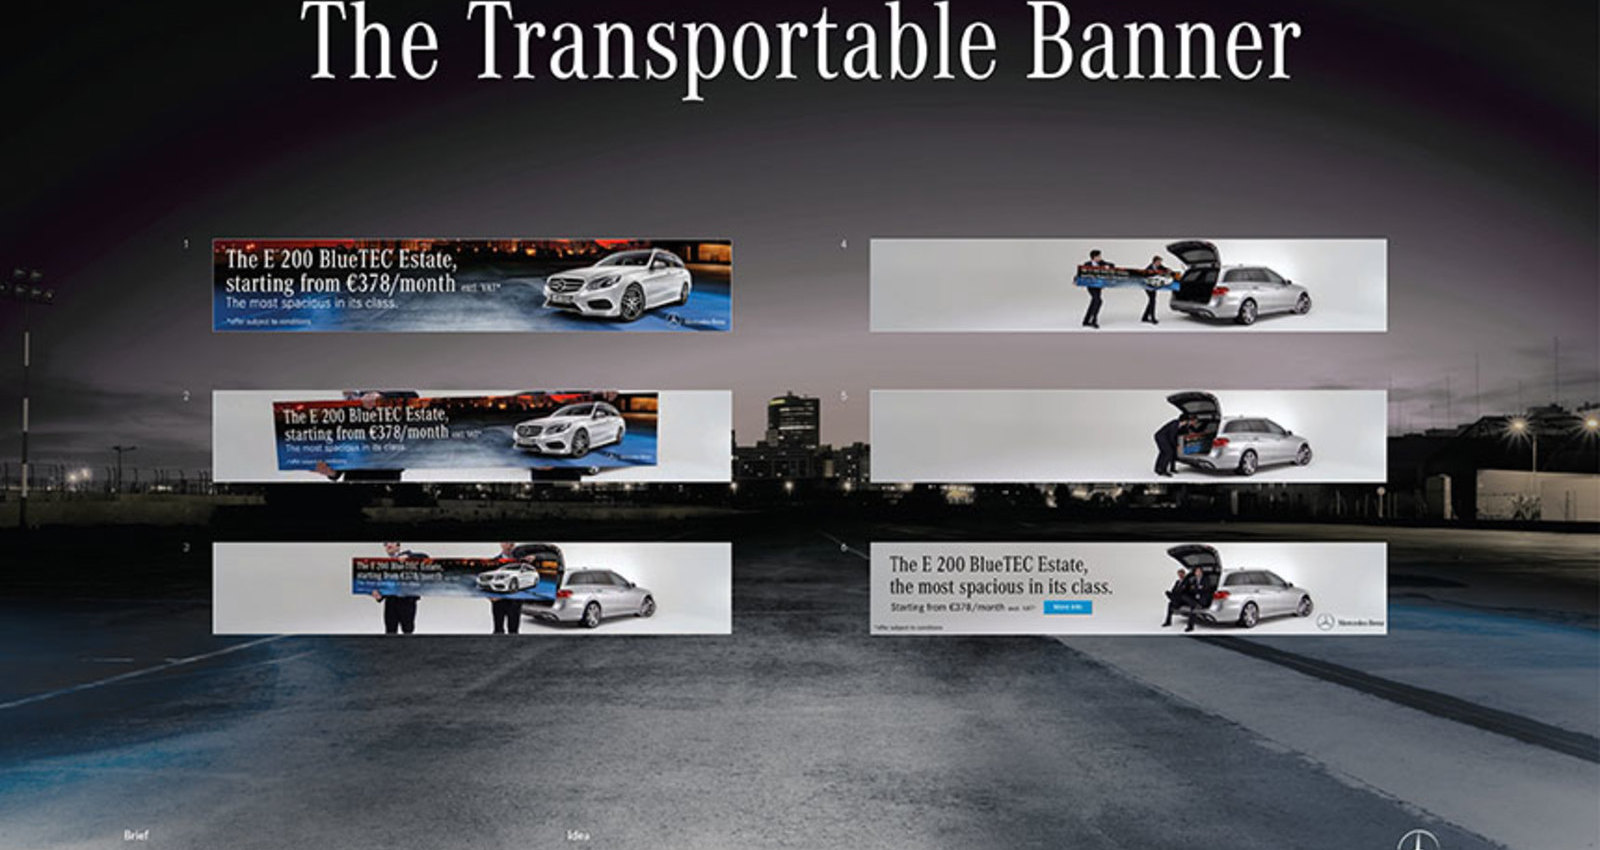 The Transportable Banner